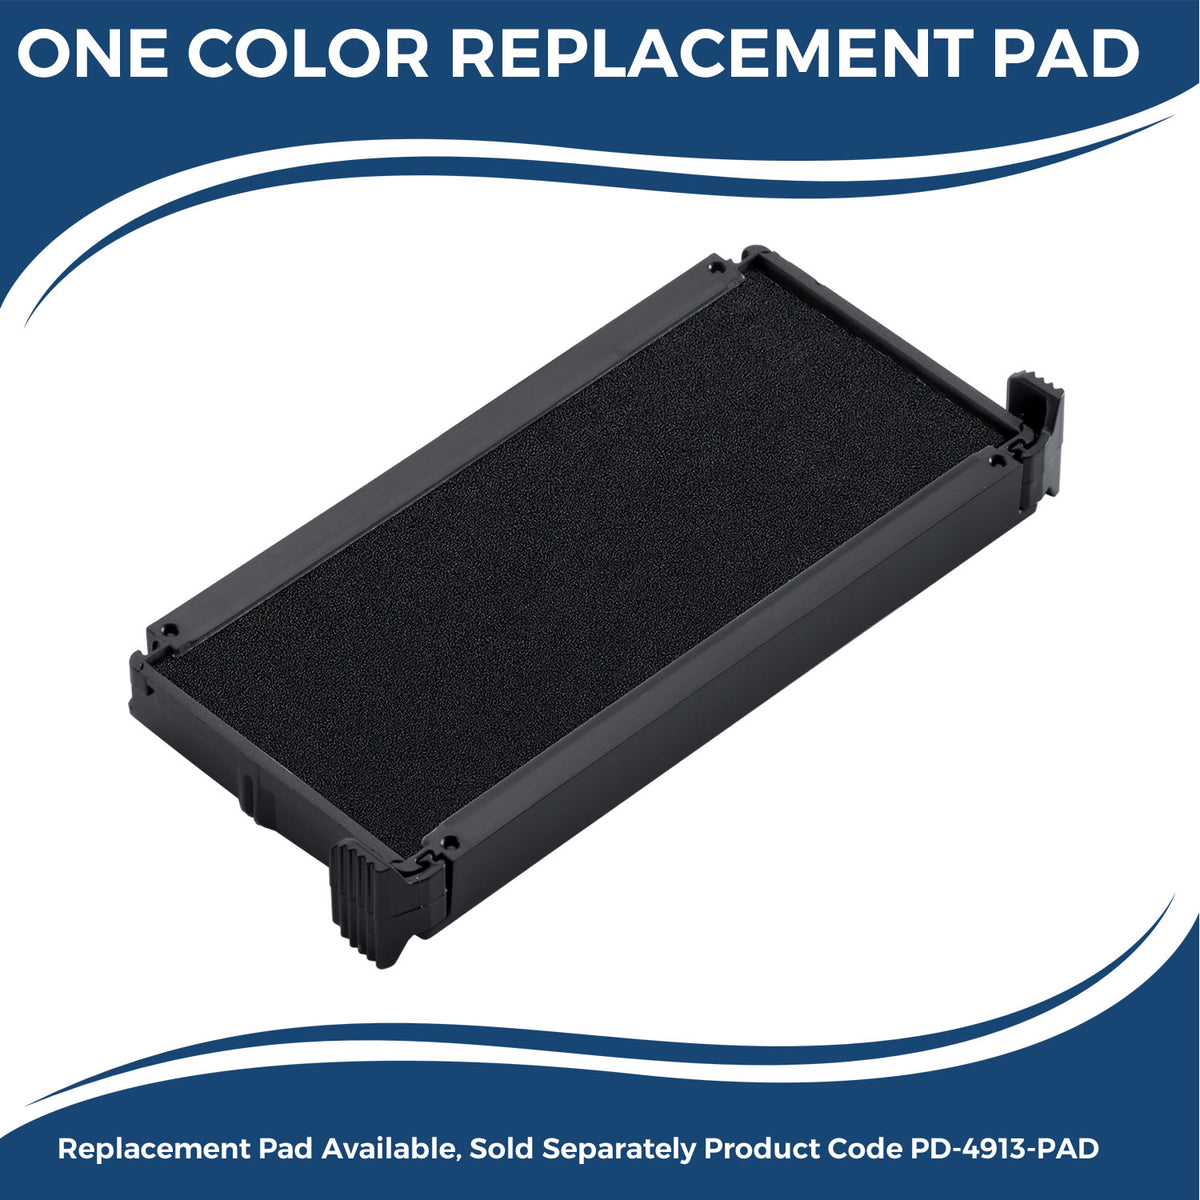 Large Self-Inking Cleaned and Sanitized Stamp 5516S Large Replacment Pad